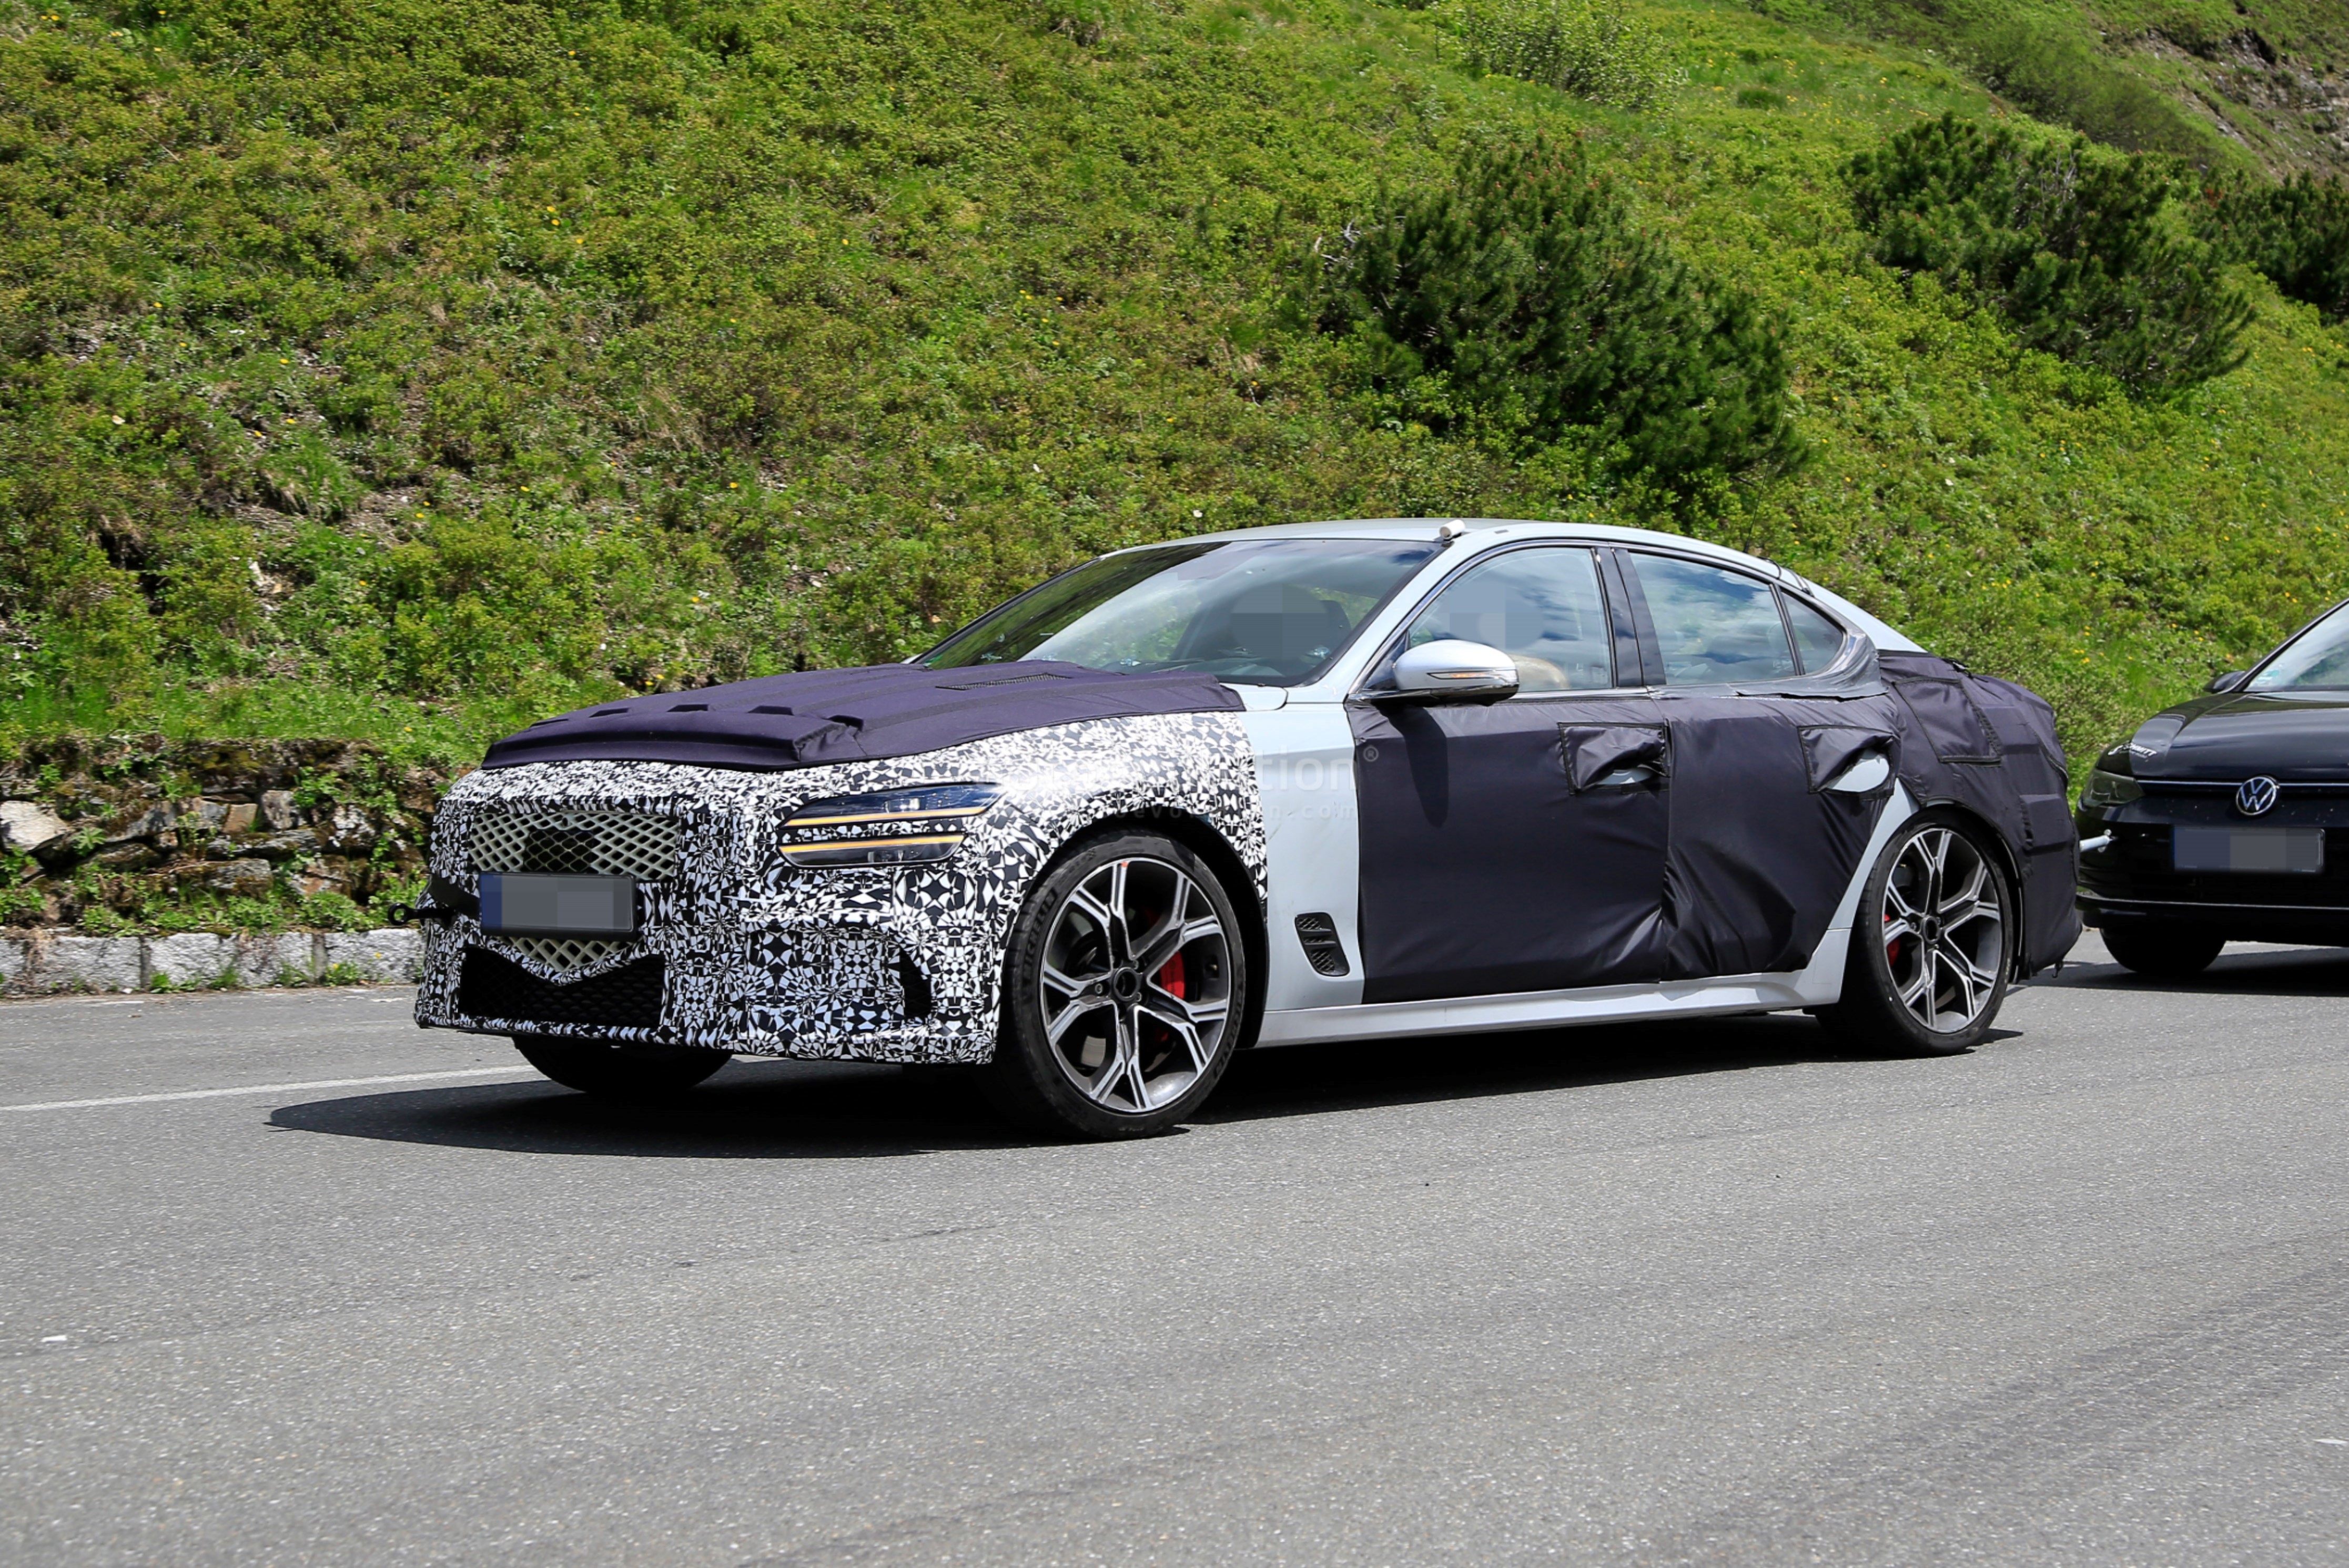 2021-genesis-g70-facelift-photographed-with-kia-stinger-wheels-brembo